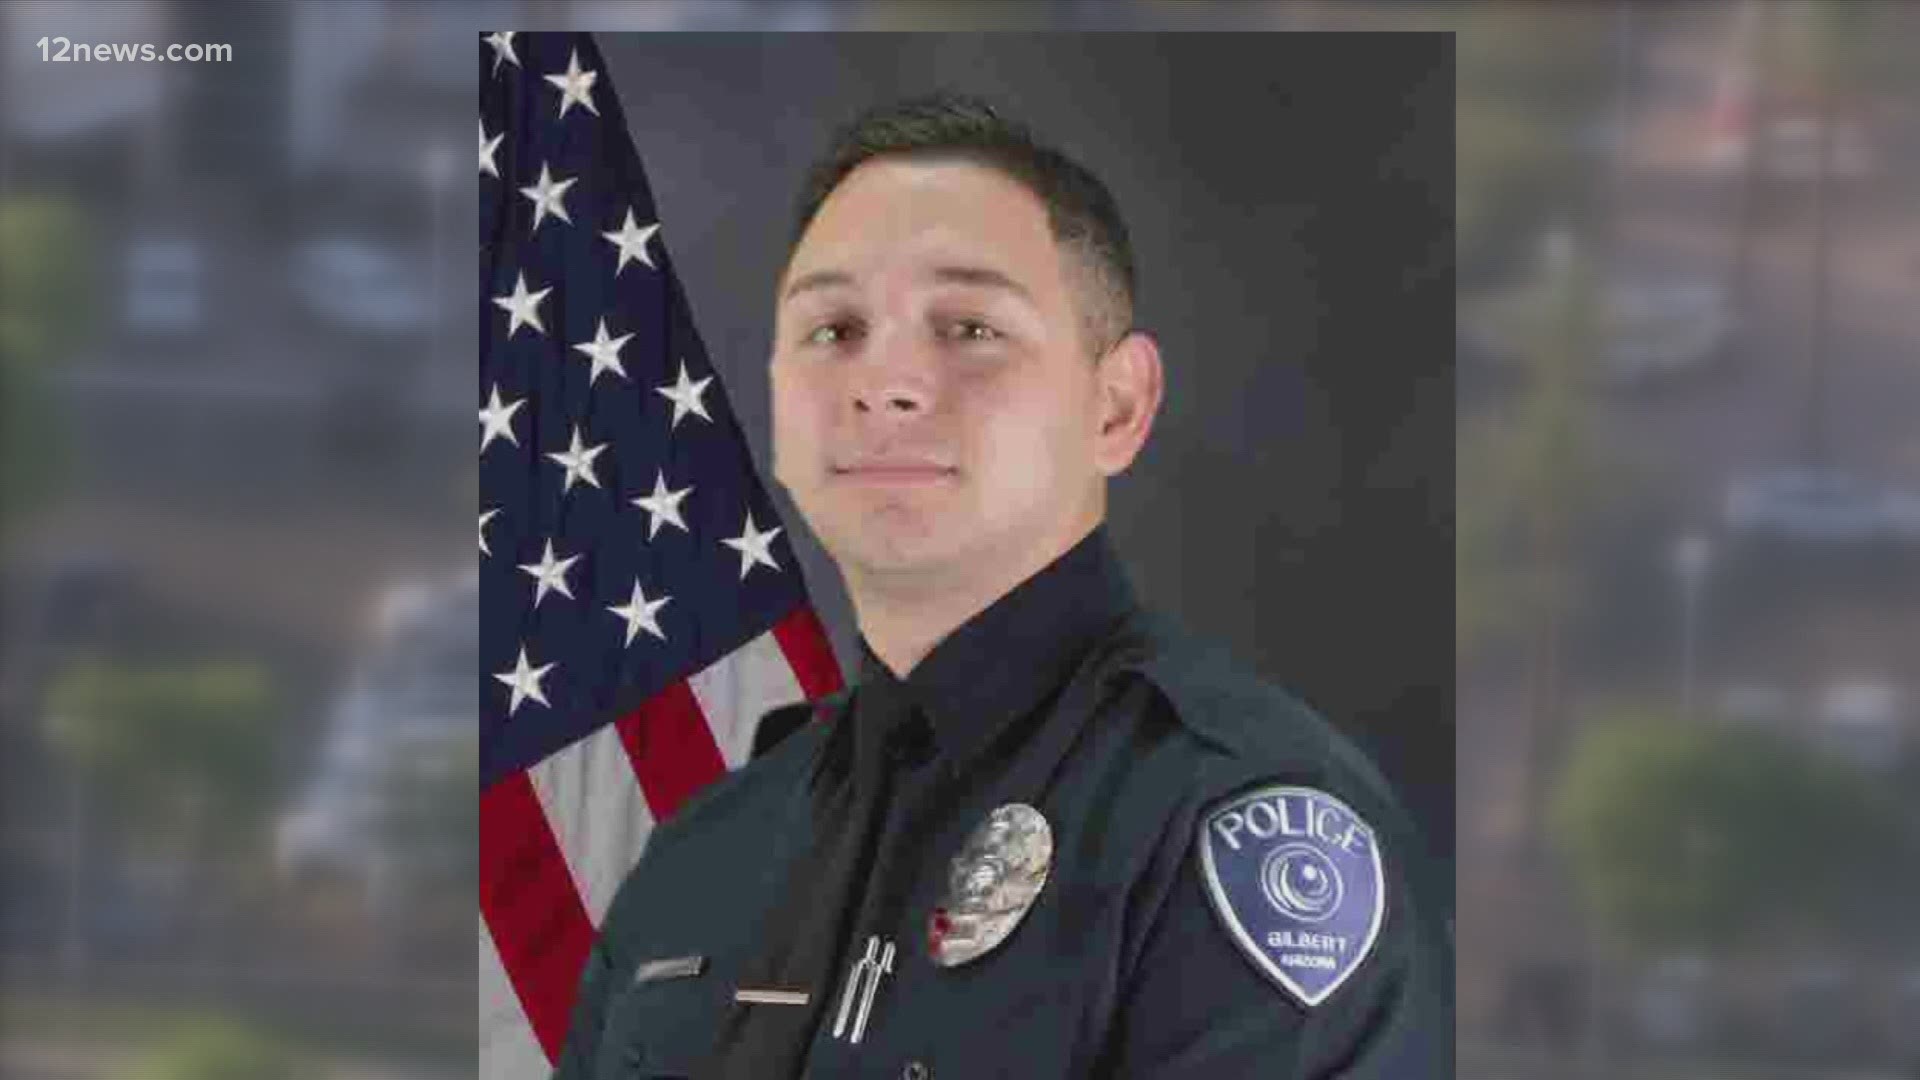 Gilbert Officer Rico Aranda was injured following a pursuit that killed a Chandler officer. He is now out of the ICU and is recovering in a rehabilitation facility.